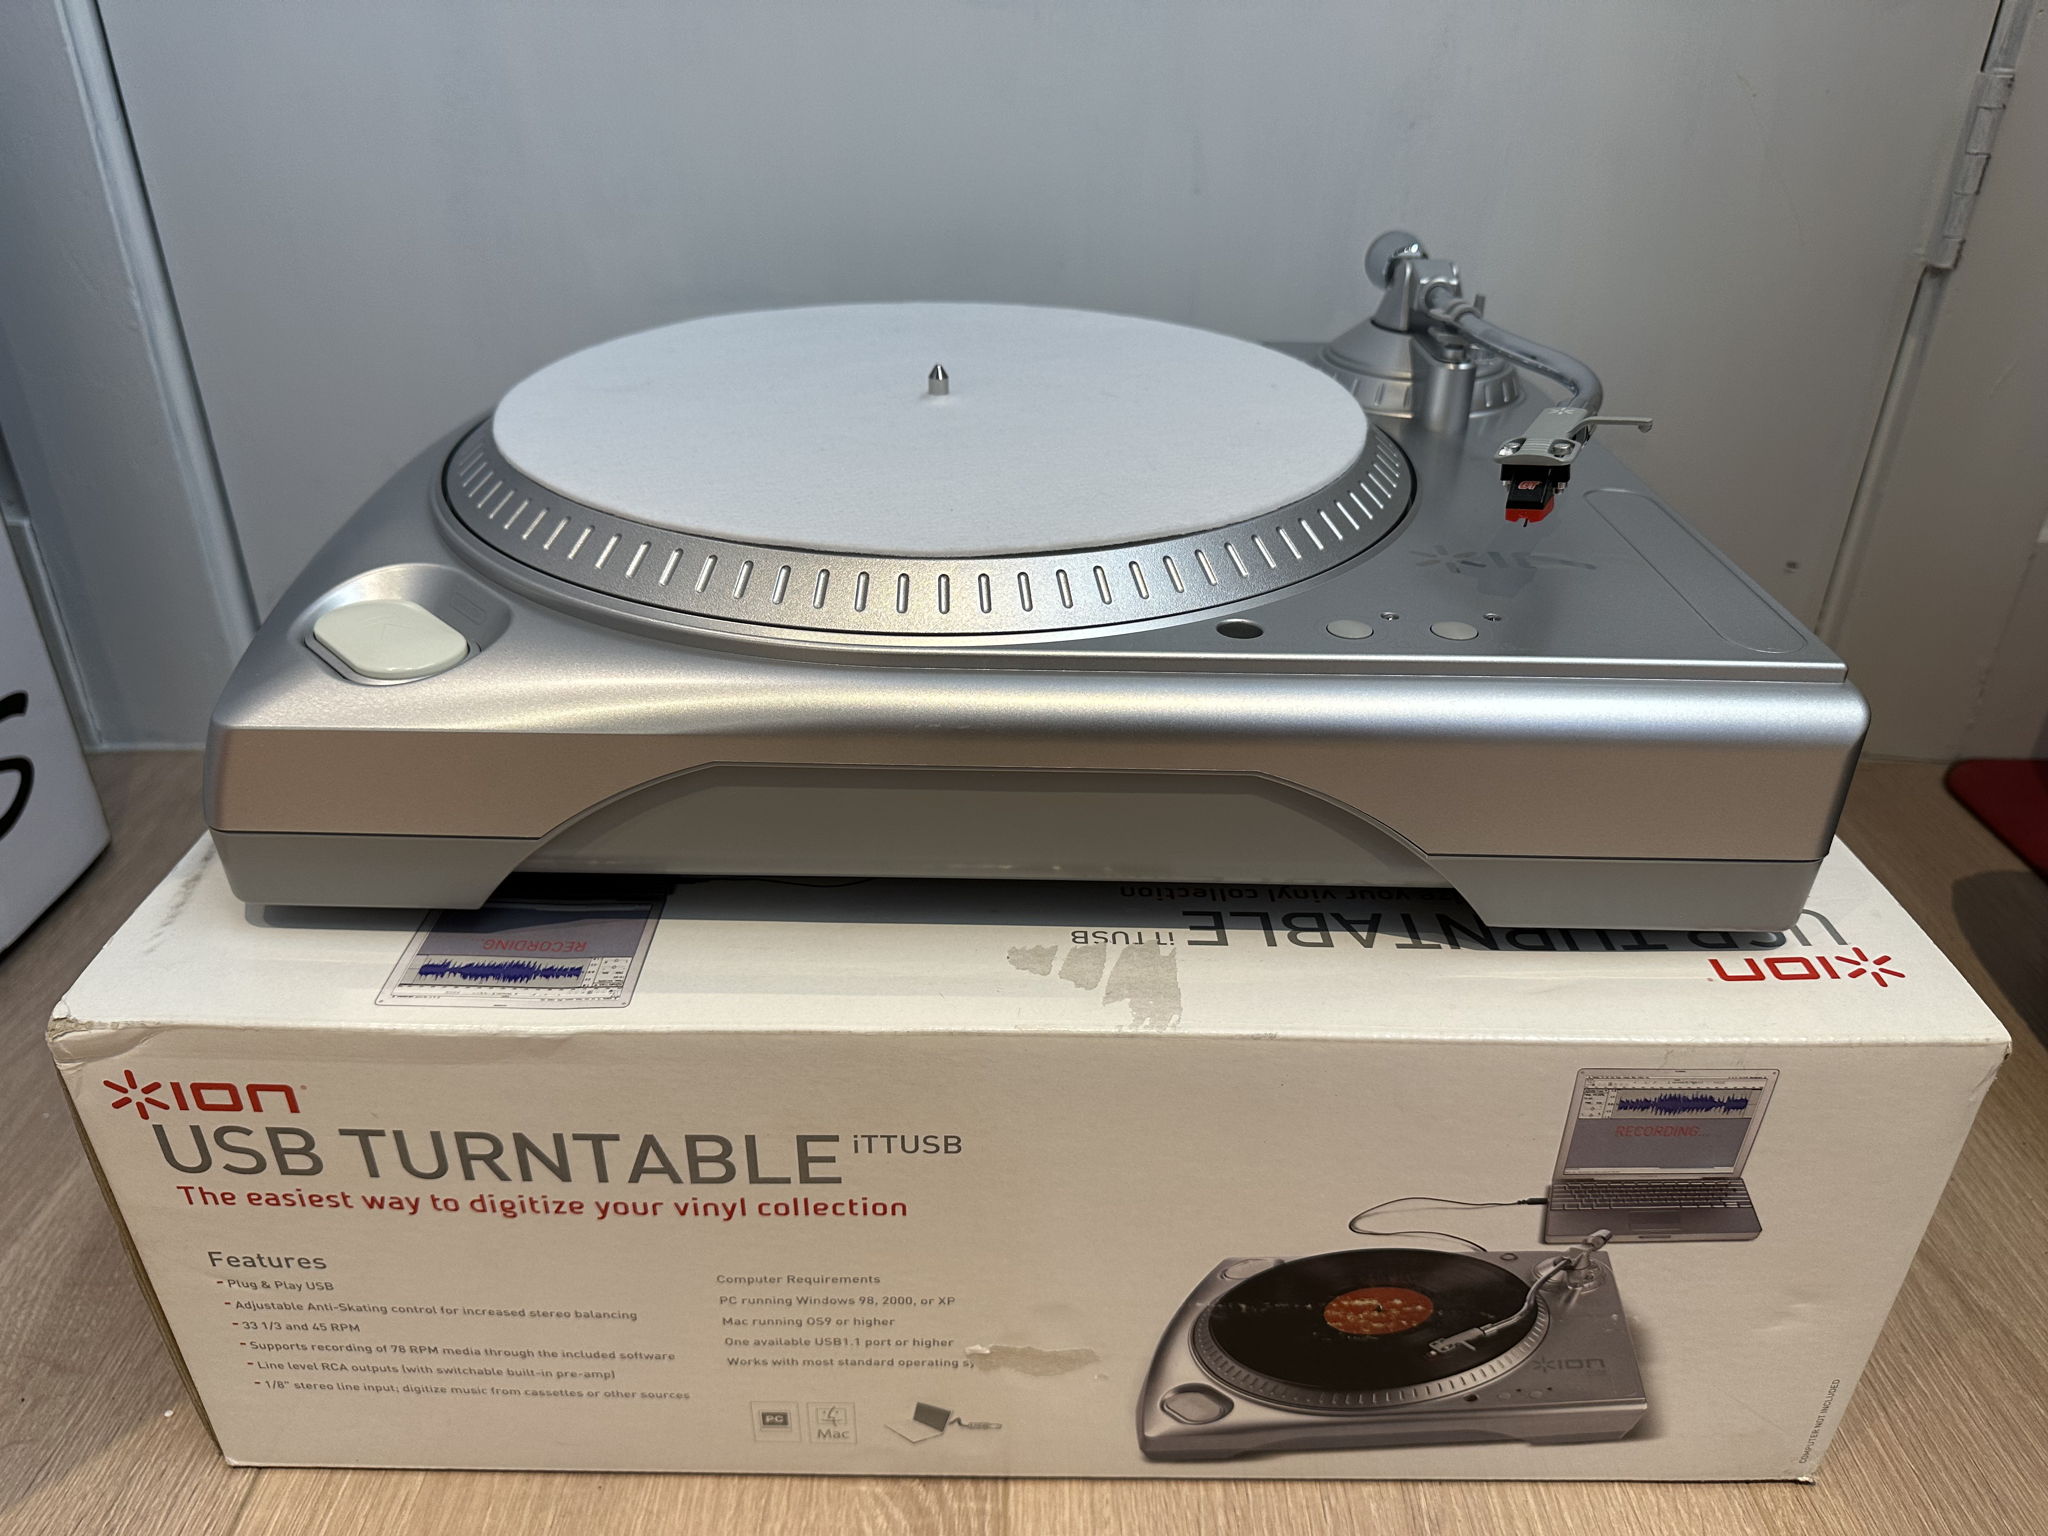 Ion USB Turntable iTTUSB Vinyl Record Player EXCELLENT